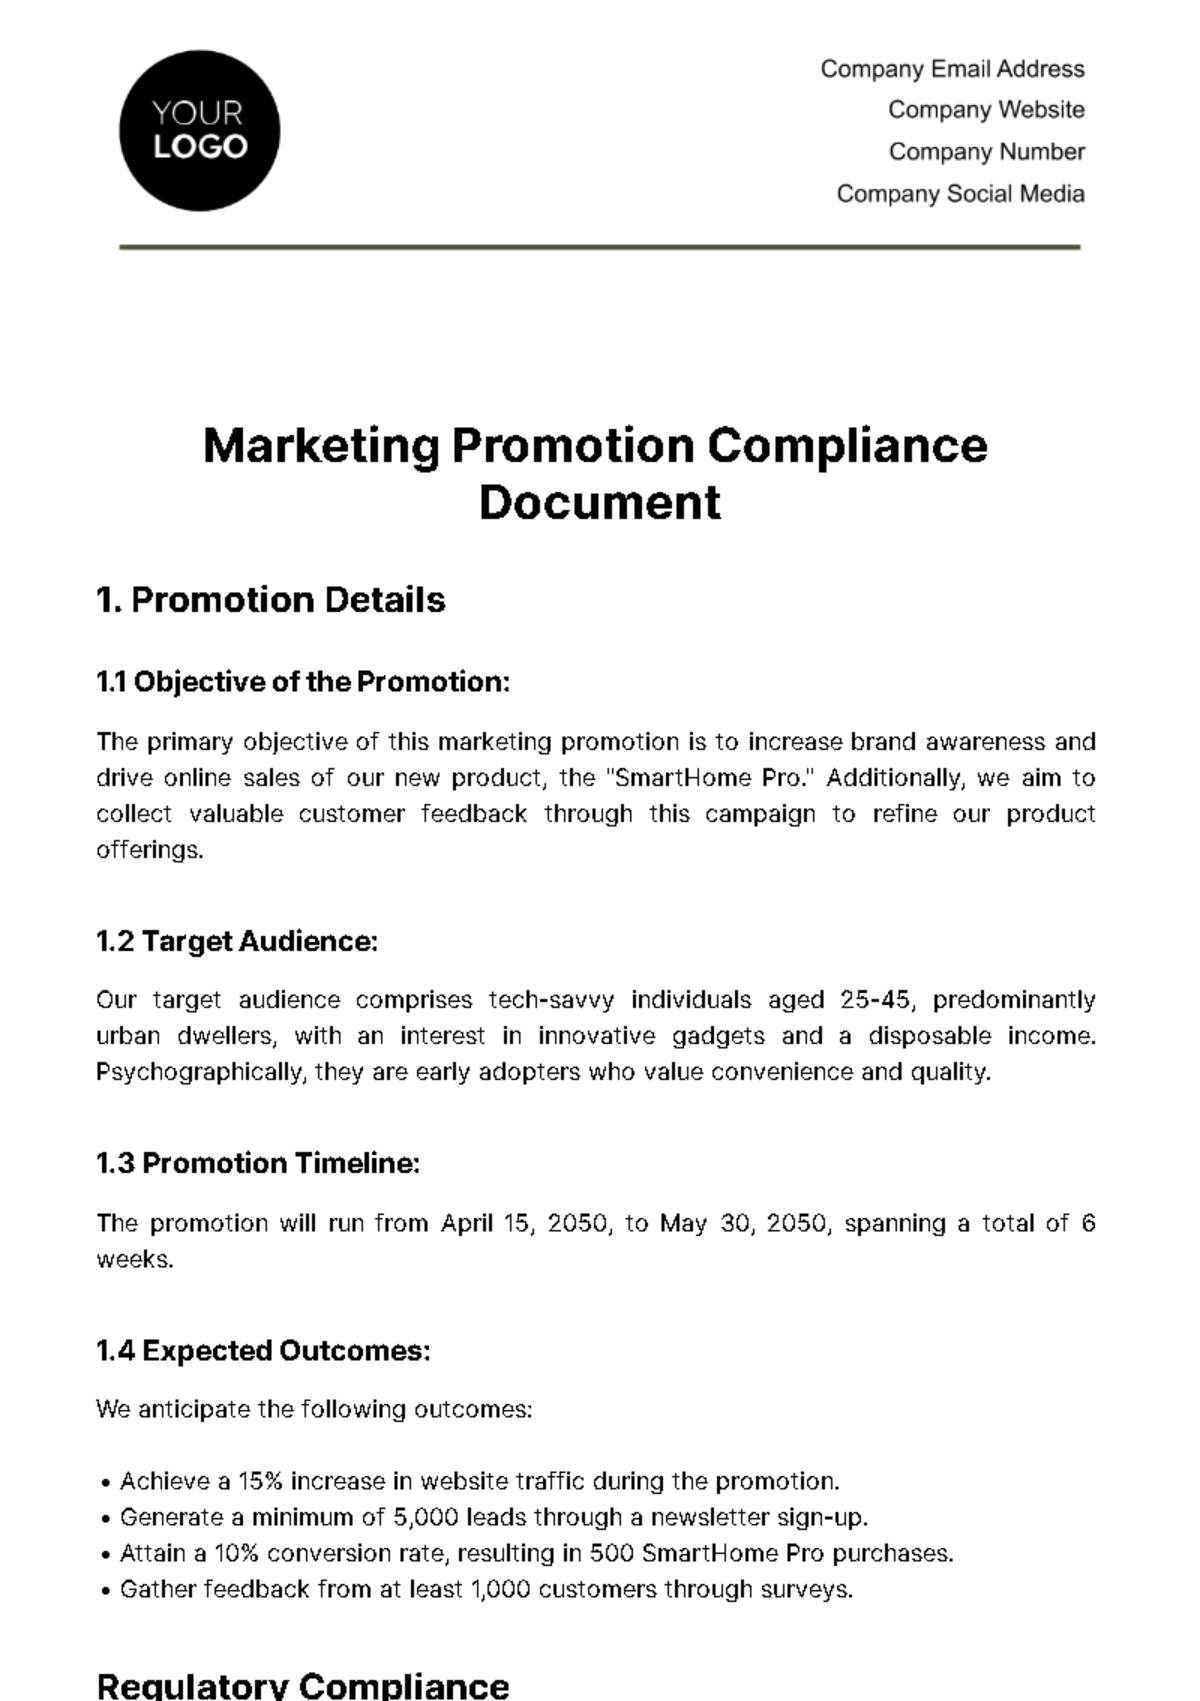 Free Marketing Promotion Compliance Document Template